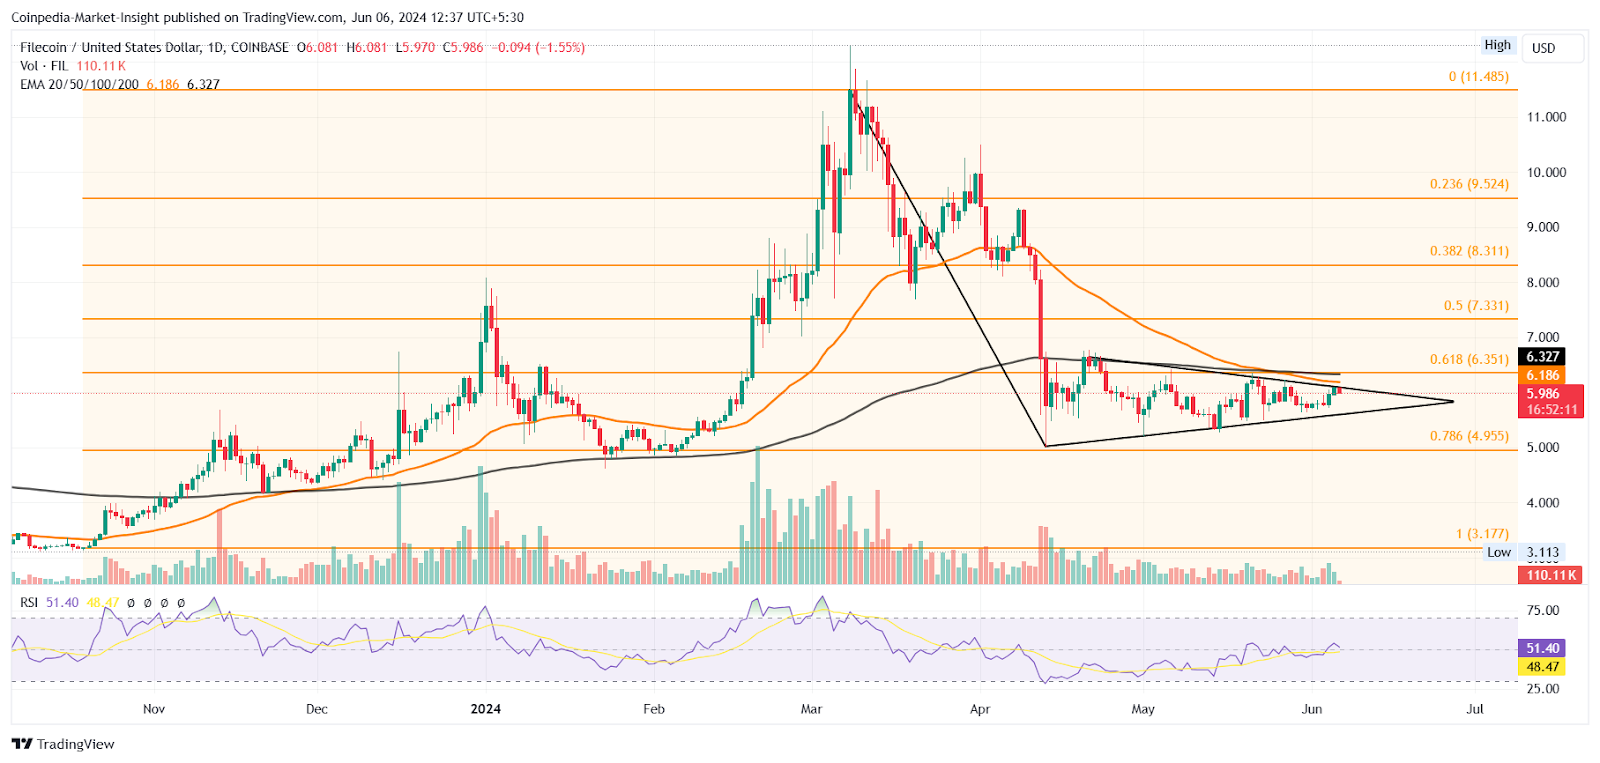 Filecoin Within Pennant Eyes Breakout Rally In FIL Price To $10 